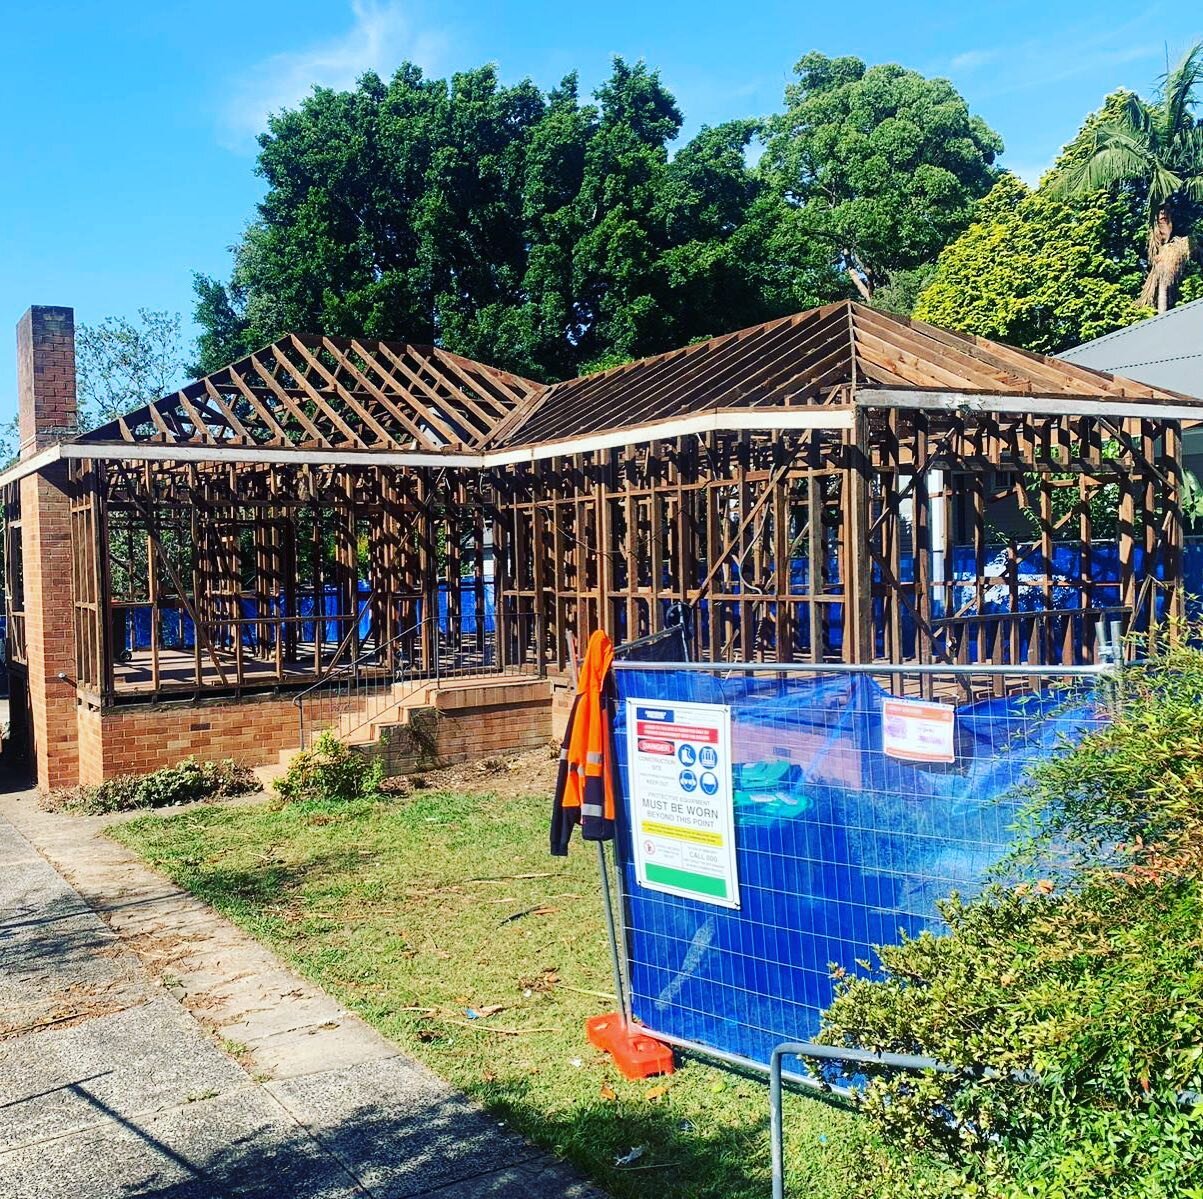 Asbestos houses are just another one of our specialties. We strip them down right to the frame and prepare them for any future works. 

For more information about our detail demolition work visit www.dynamicdemolition.com.au 😃
.
.
.
.
.

#renovation